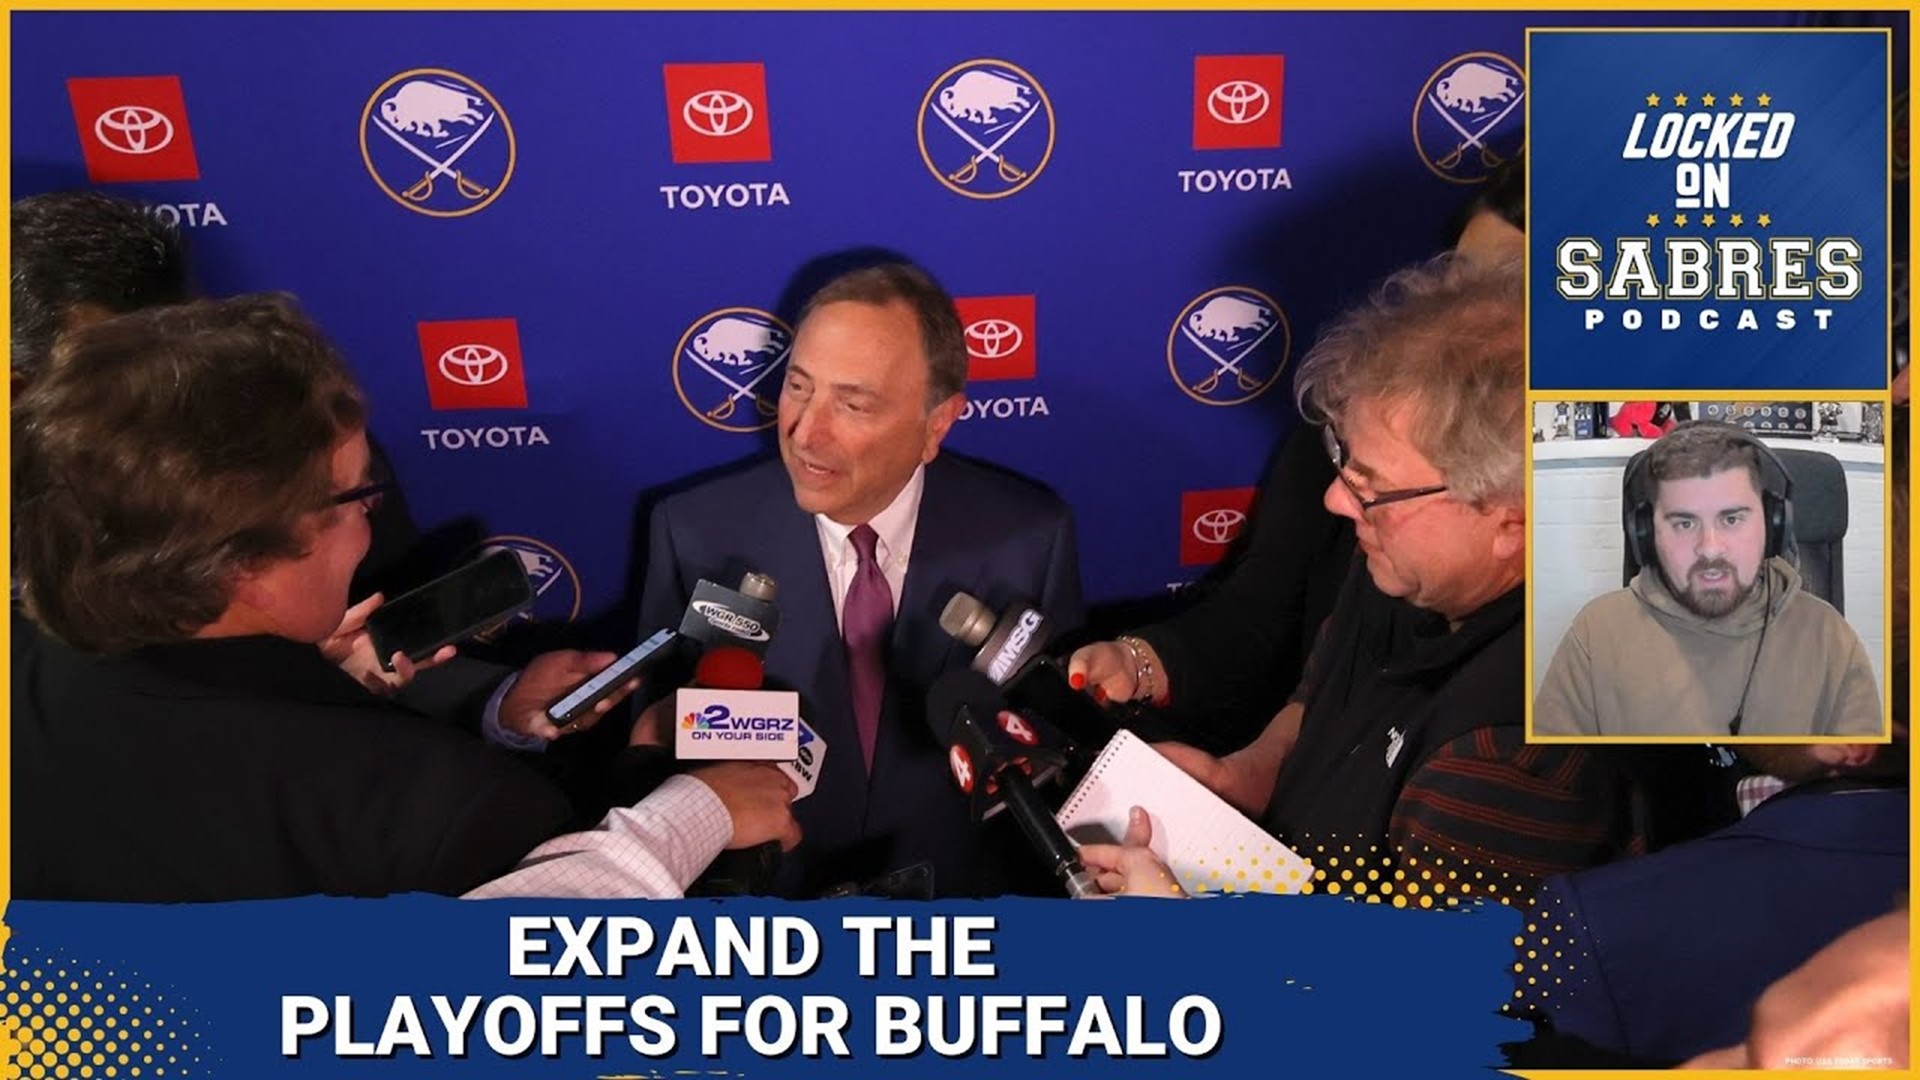 NHL should expand the playoff format for Buffalo